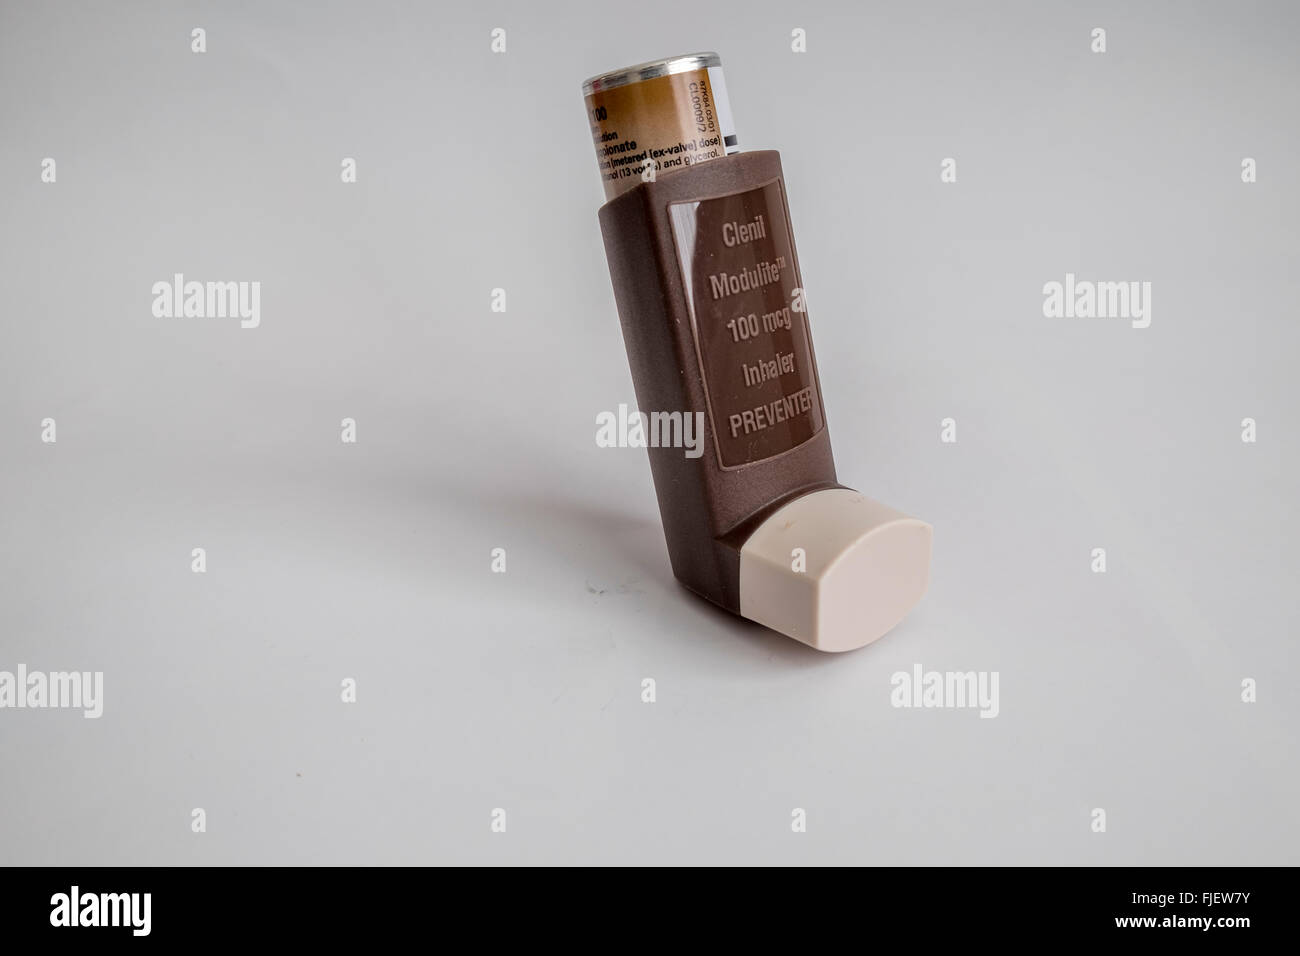 Preventer brown inhaler showing canister of liquid end cap and main body Stock Photo